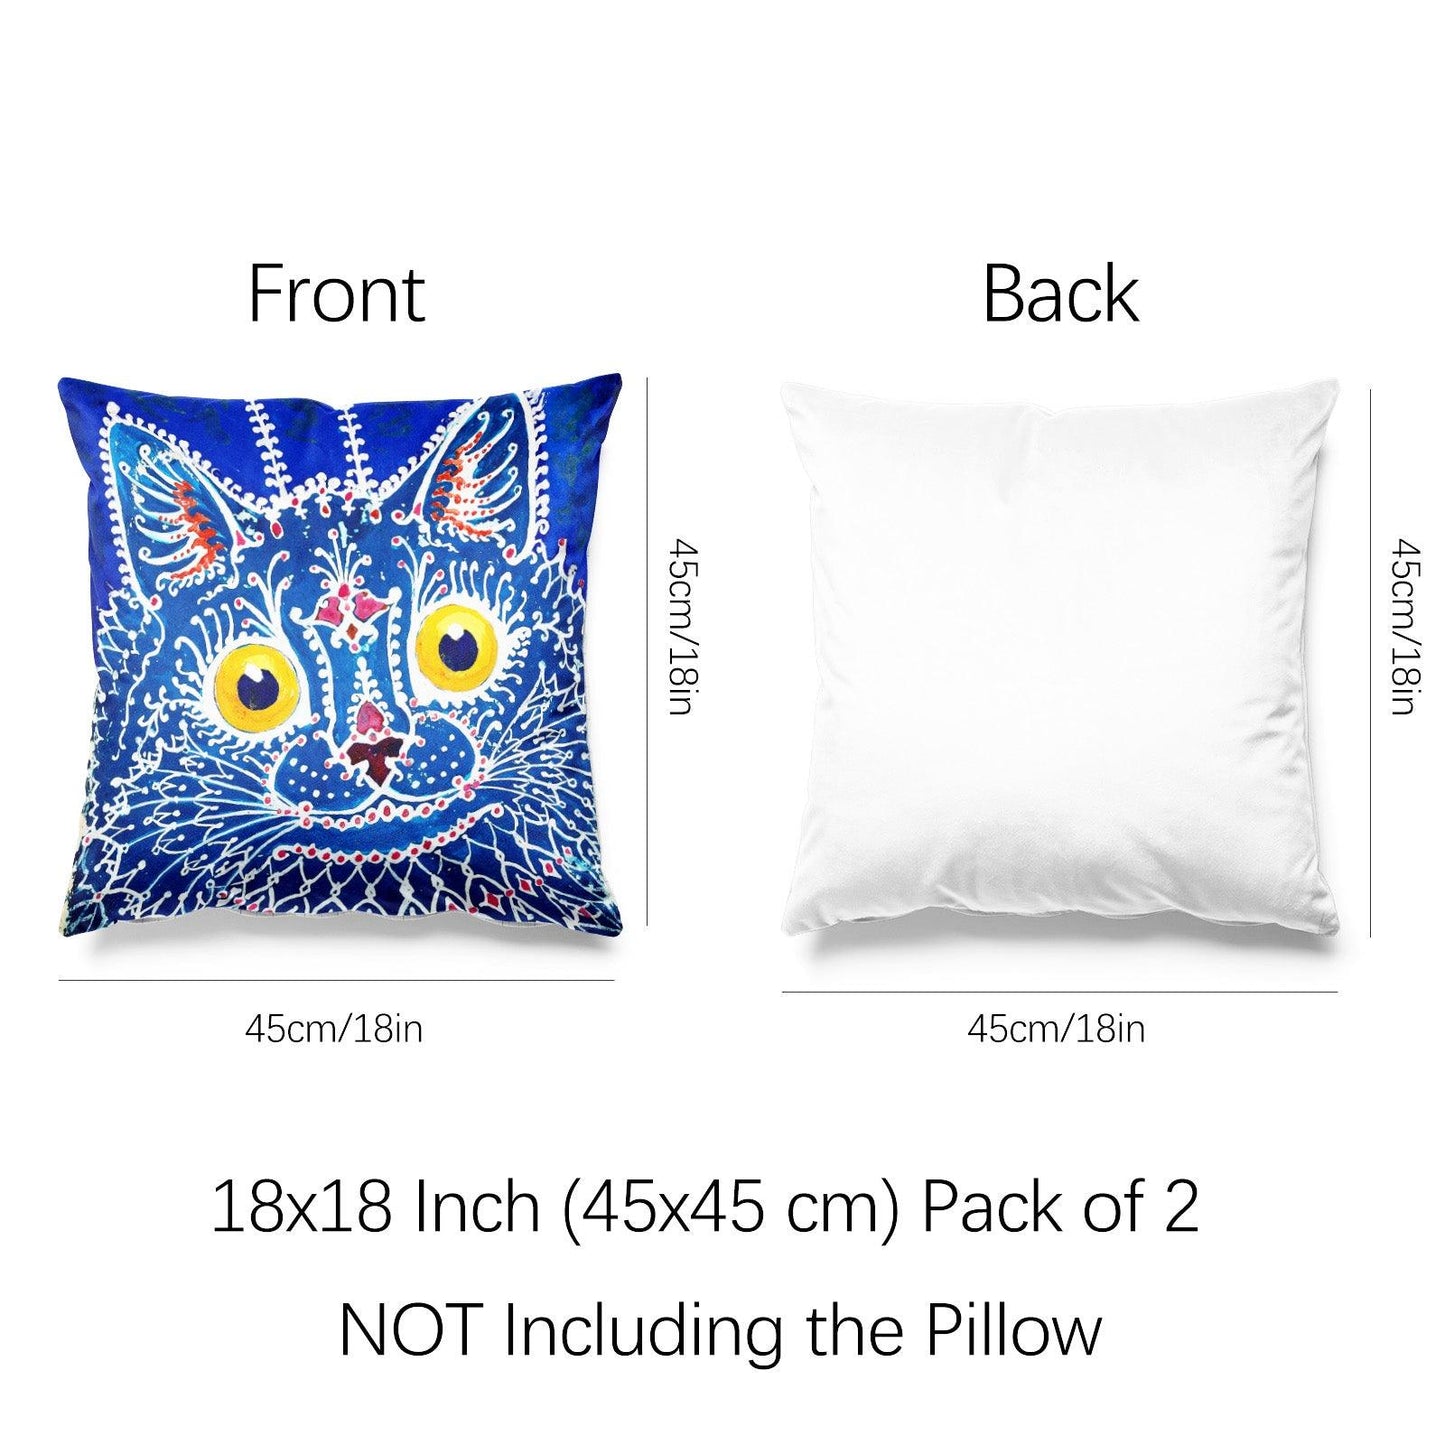 Art Animal Throw Pillow Covers Pack of 2 18x18 Inch (A Cat in Gothic Style by Louis Wain) - Berkin Arts